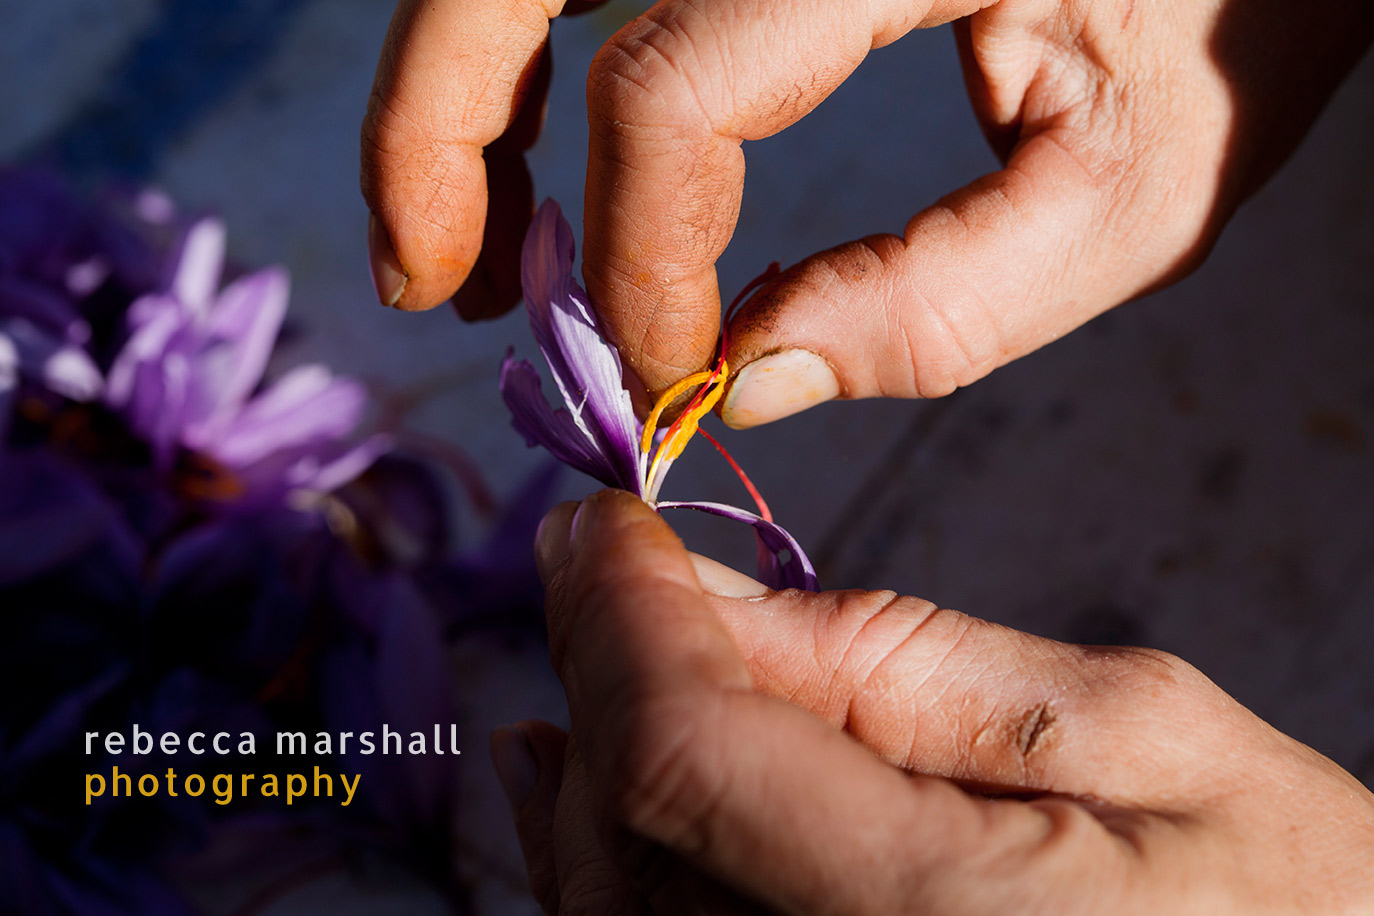 Close-up of a hand separating the stigma from the rest of a saffron crocus in preparation for the production of dried saffron